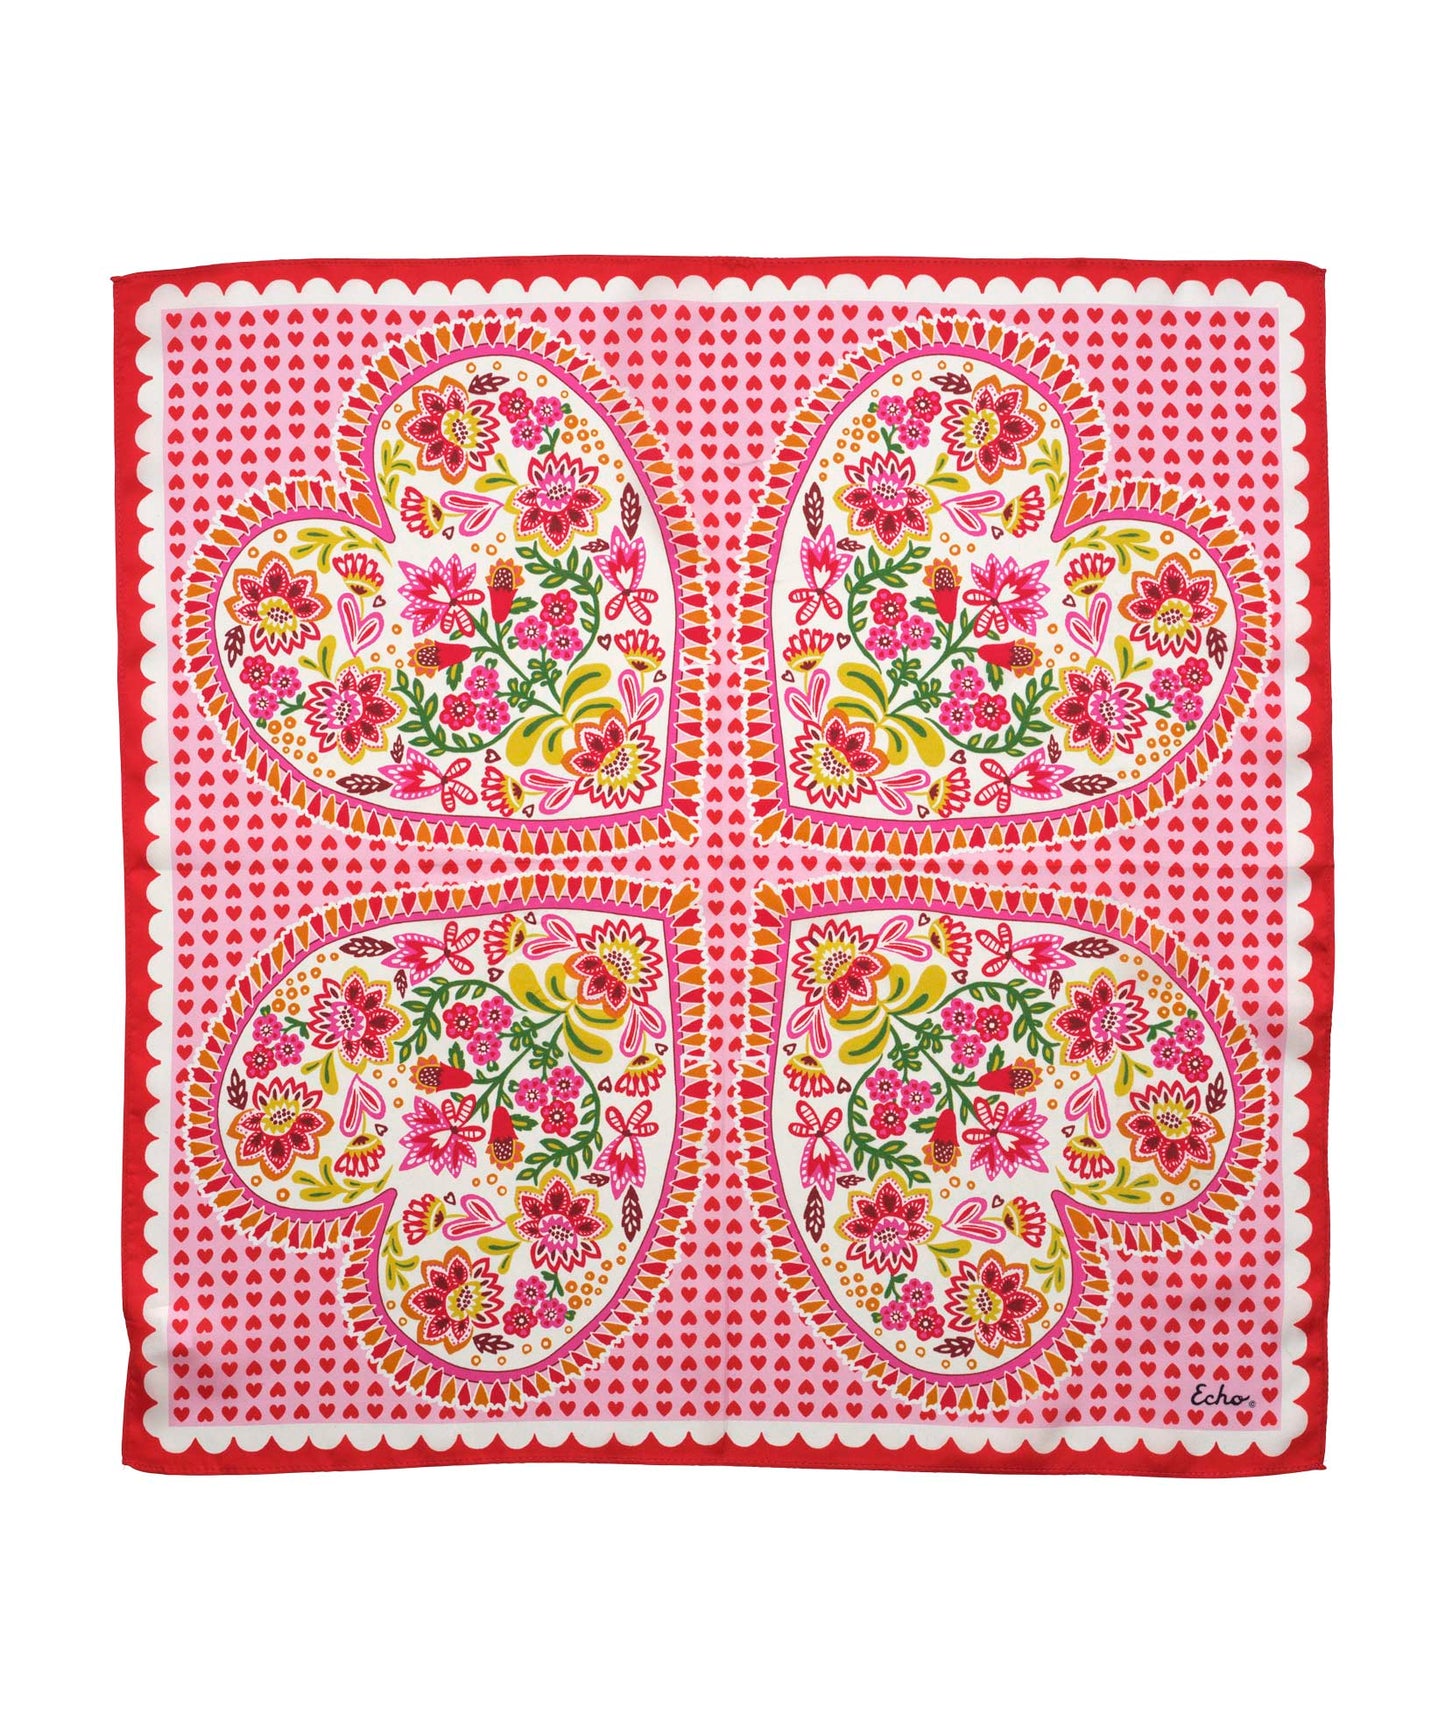 Sweetie Silk Bandana in color Candy Pink